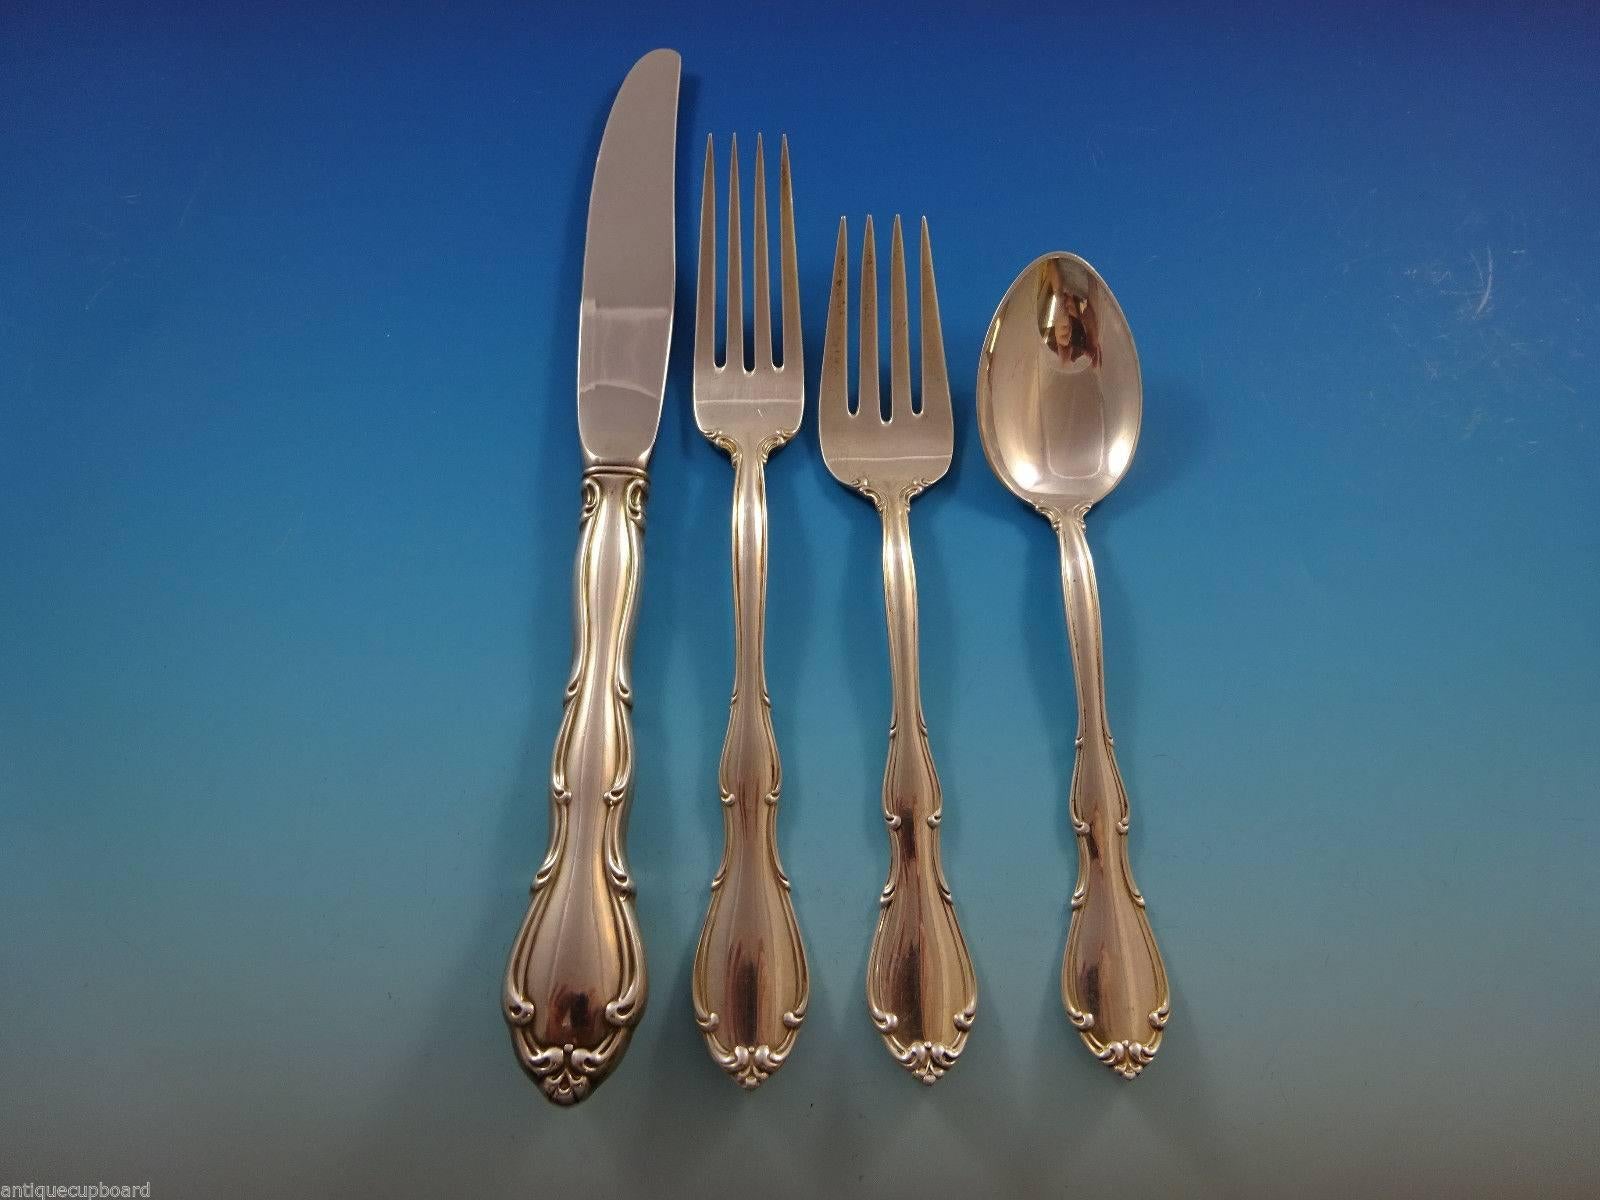 Fontana by Towle sterling silver flatware set, 32 pieces. This set includes:

Eight knives, 9